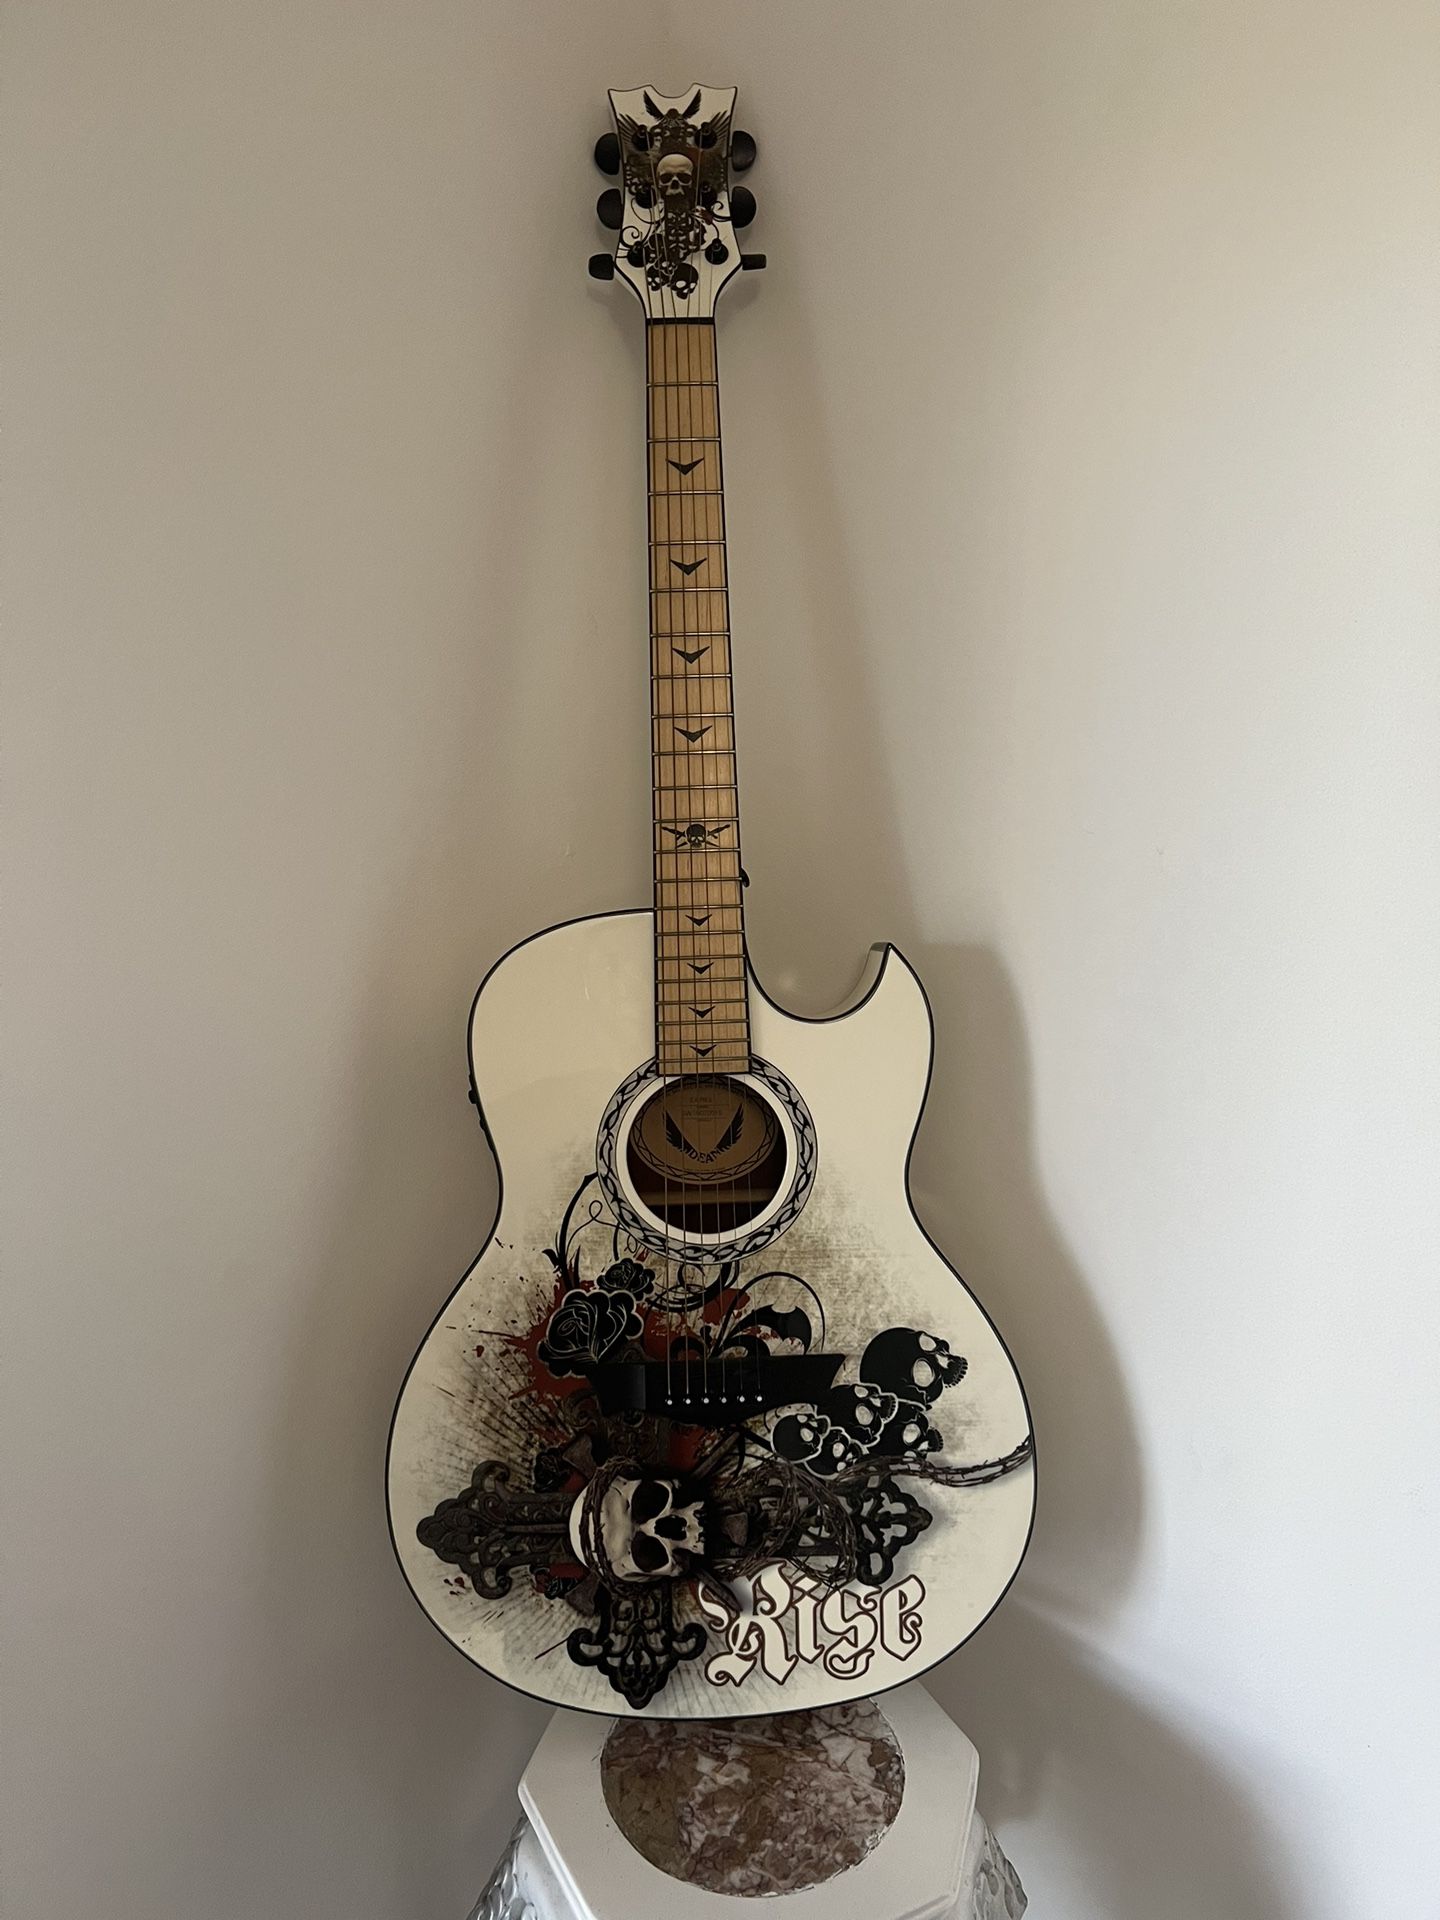 Dean Exhibition Resurrection Acoustic-Electric Guitar for Sale in